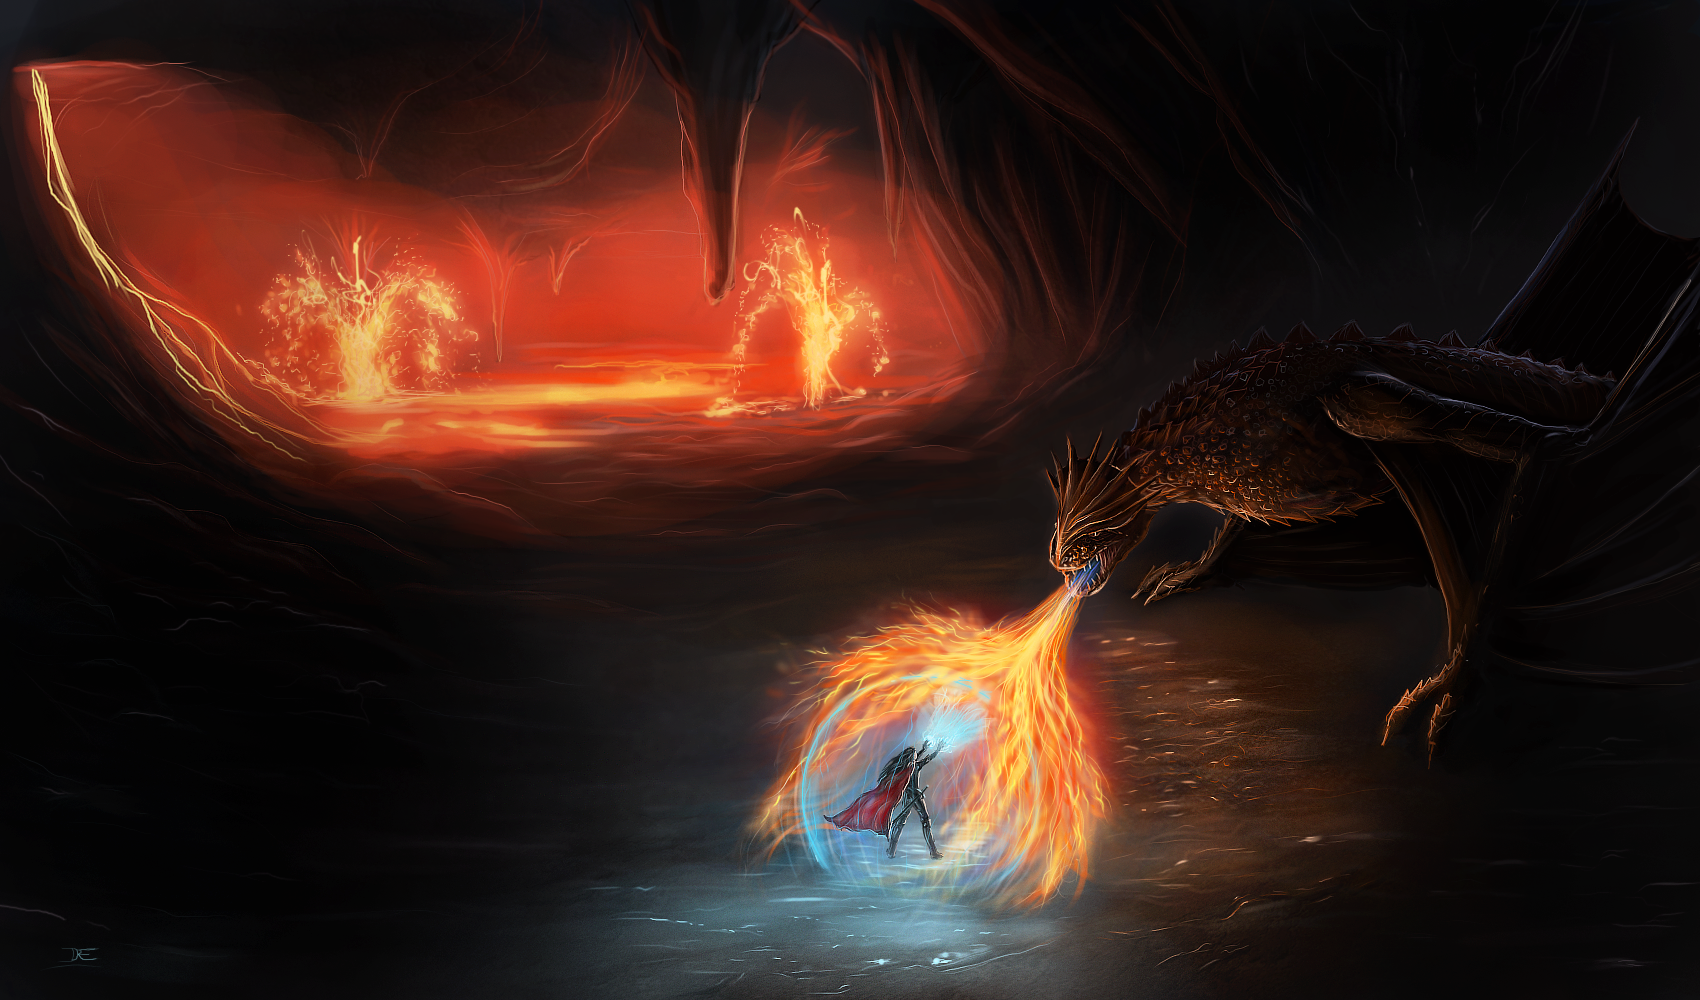 Badass Dragon Fight In A Cave By Smilingbounder